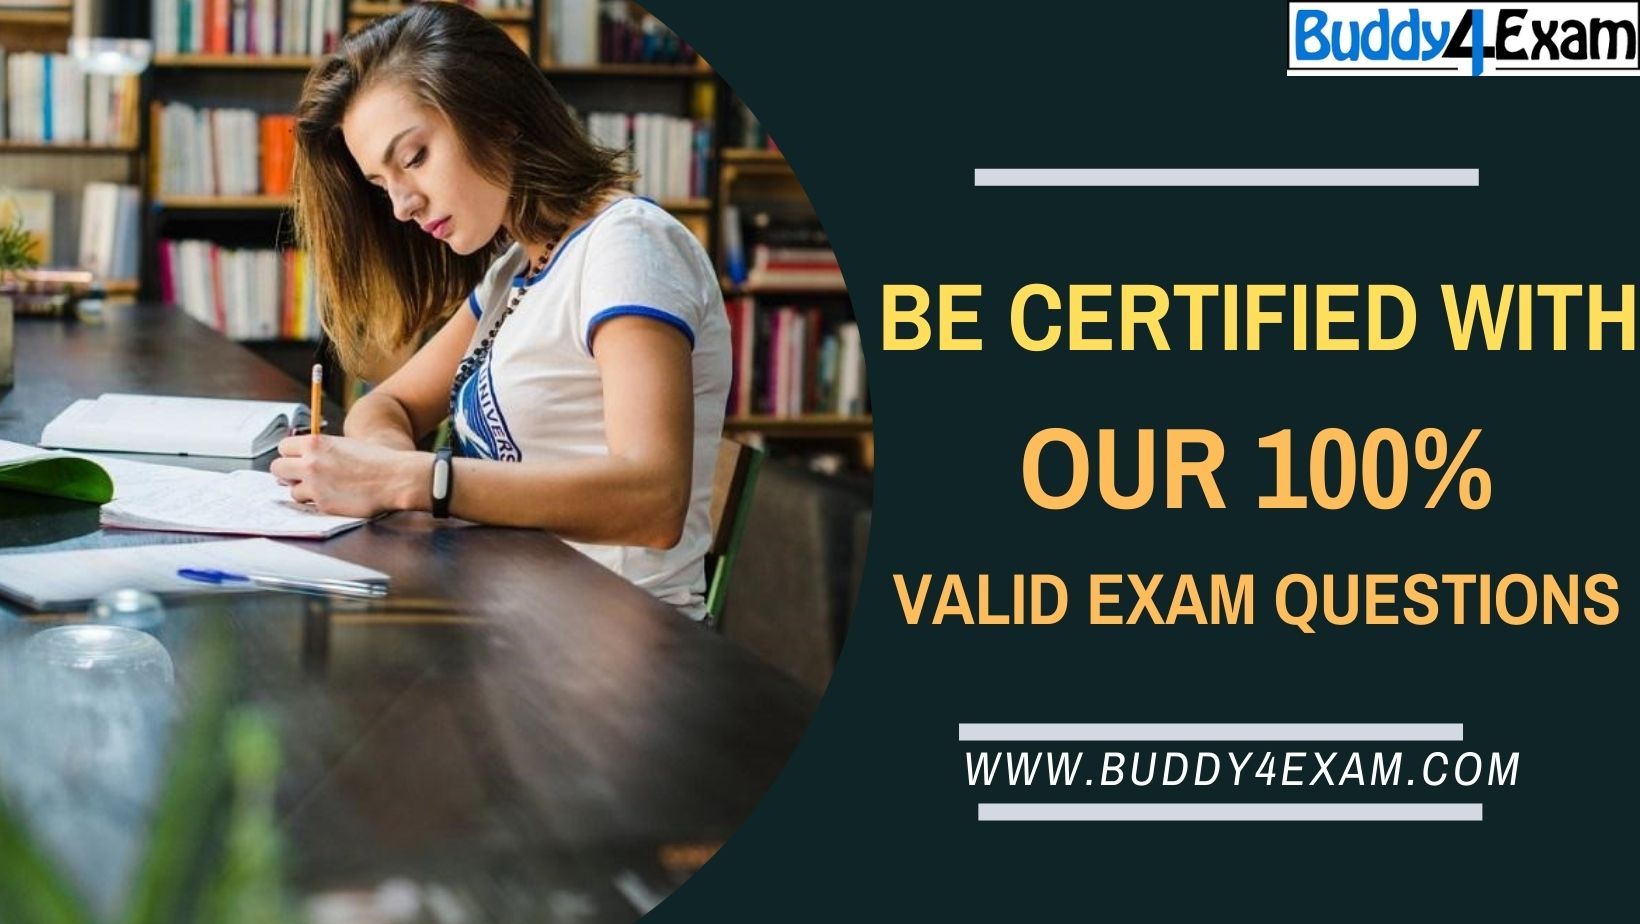 Group-Excel In GAQM ISO27-13-001 Exam with Buddy4exam s Updated Exam Questions 100 valid.jpg